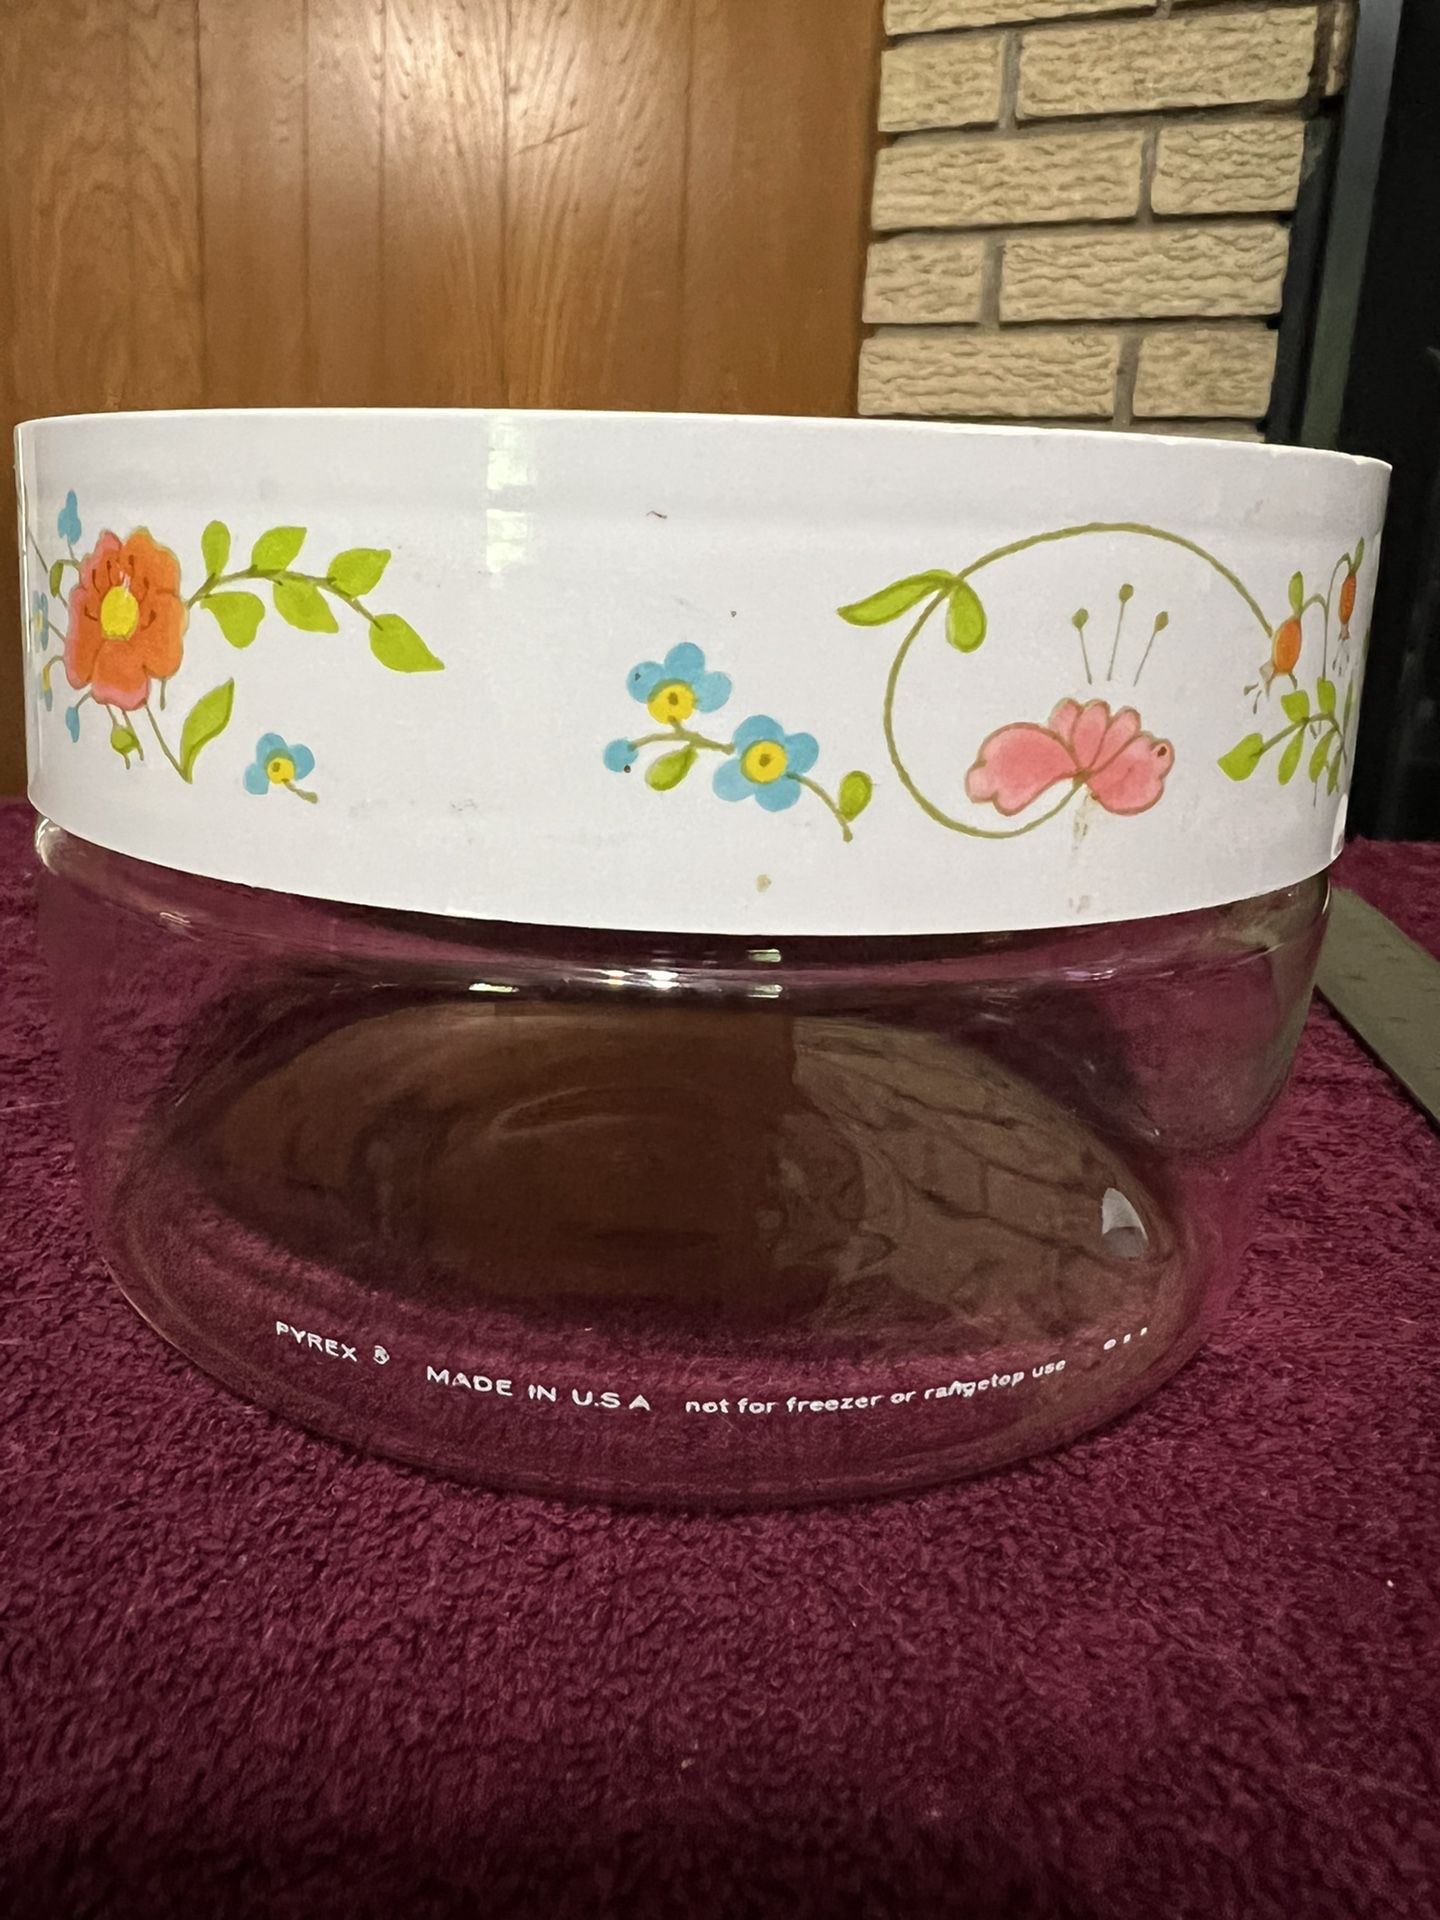 Vintage Pyrex Wildflower Clear Glass See N Store Canister Jar With Lid Approximate Measurements:  3.75”high x 4.25" base